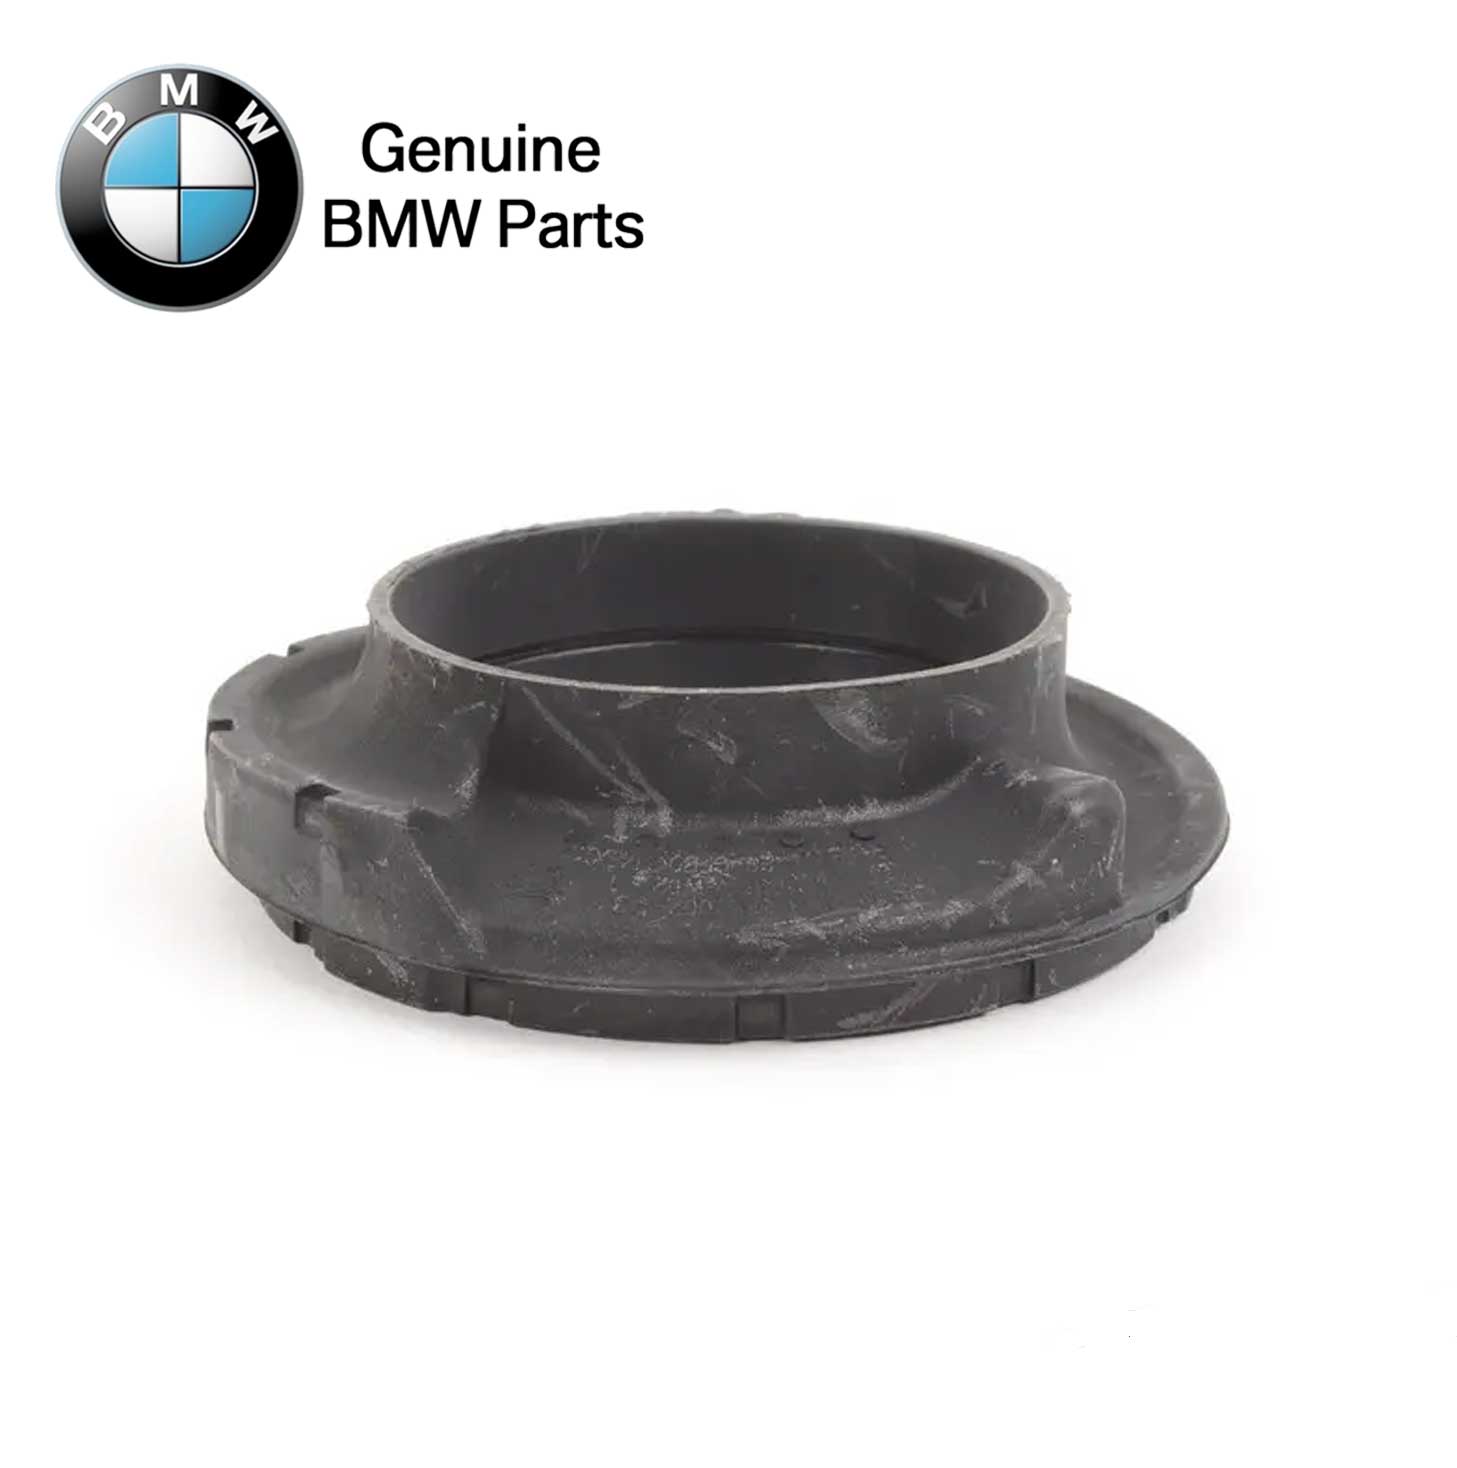 BMW Genuine SPRING PAD (Original Parts Without Sticker Level and Neutral Box) 31336857002